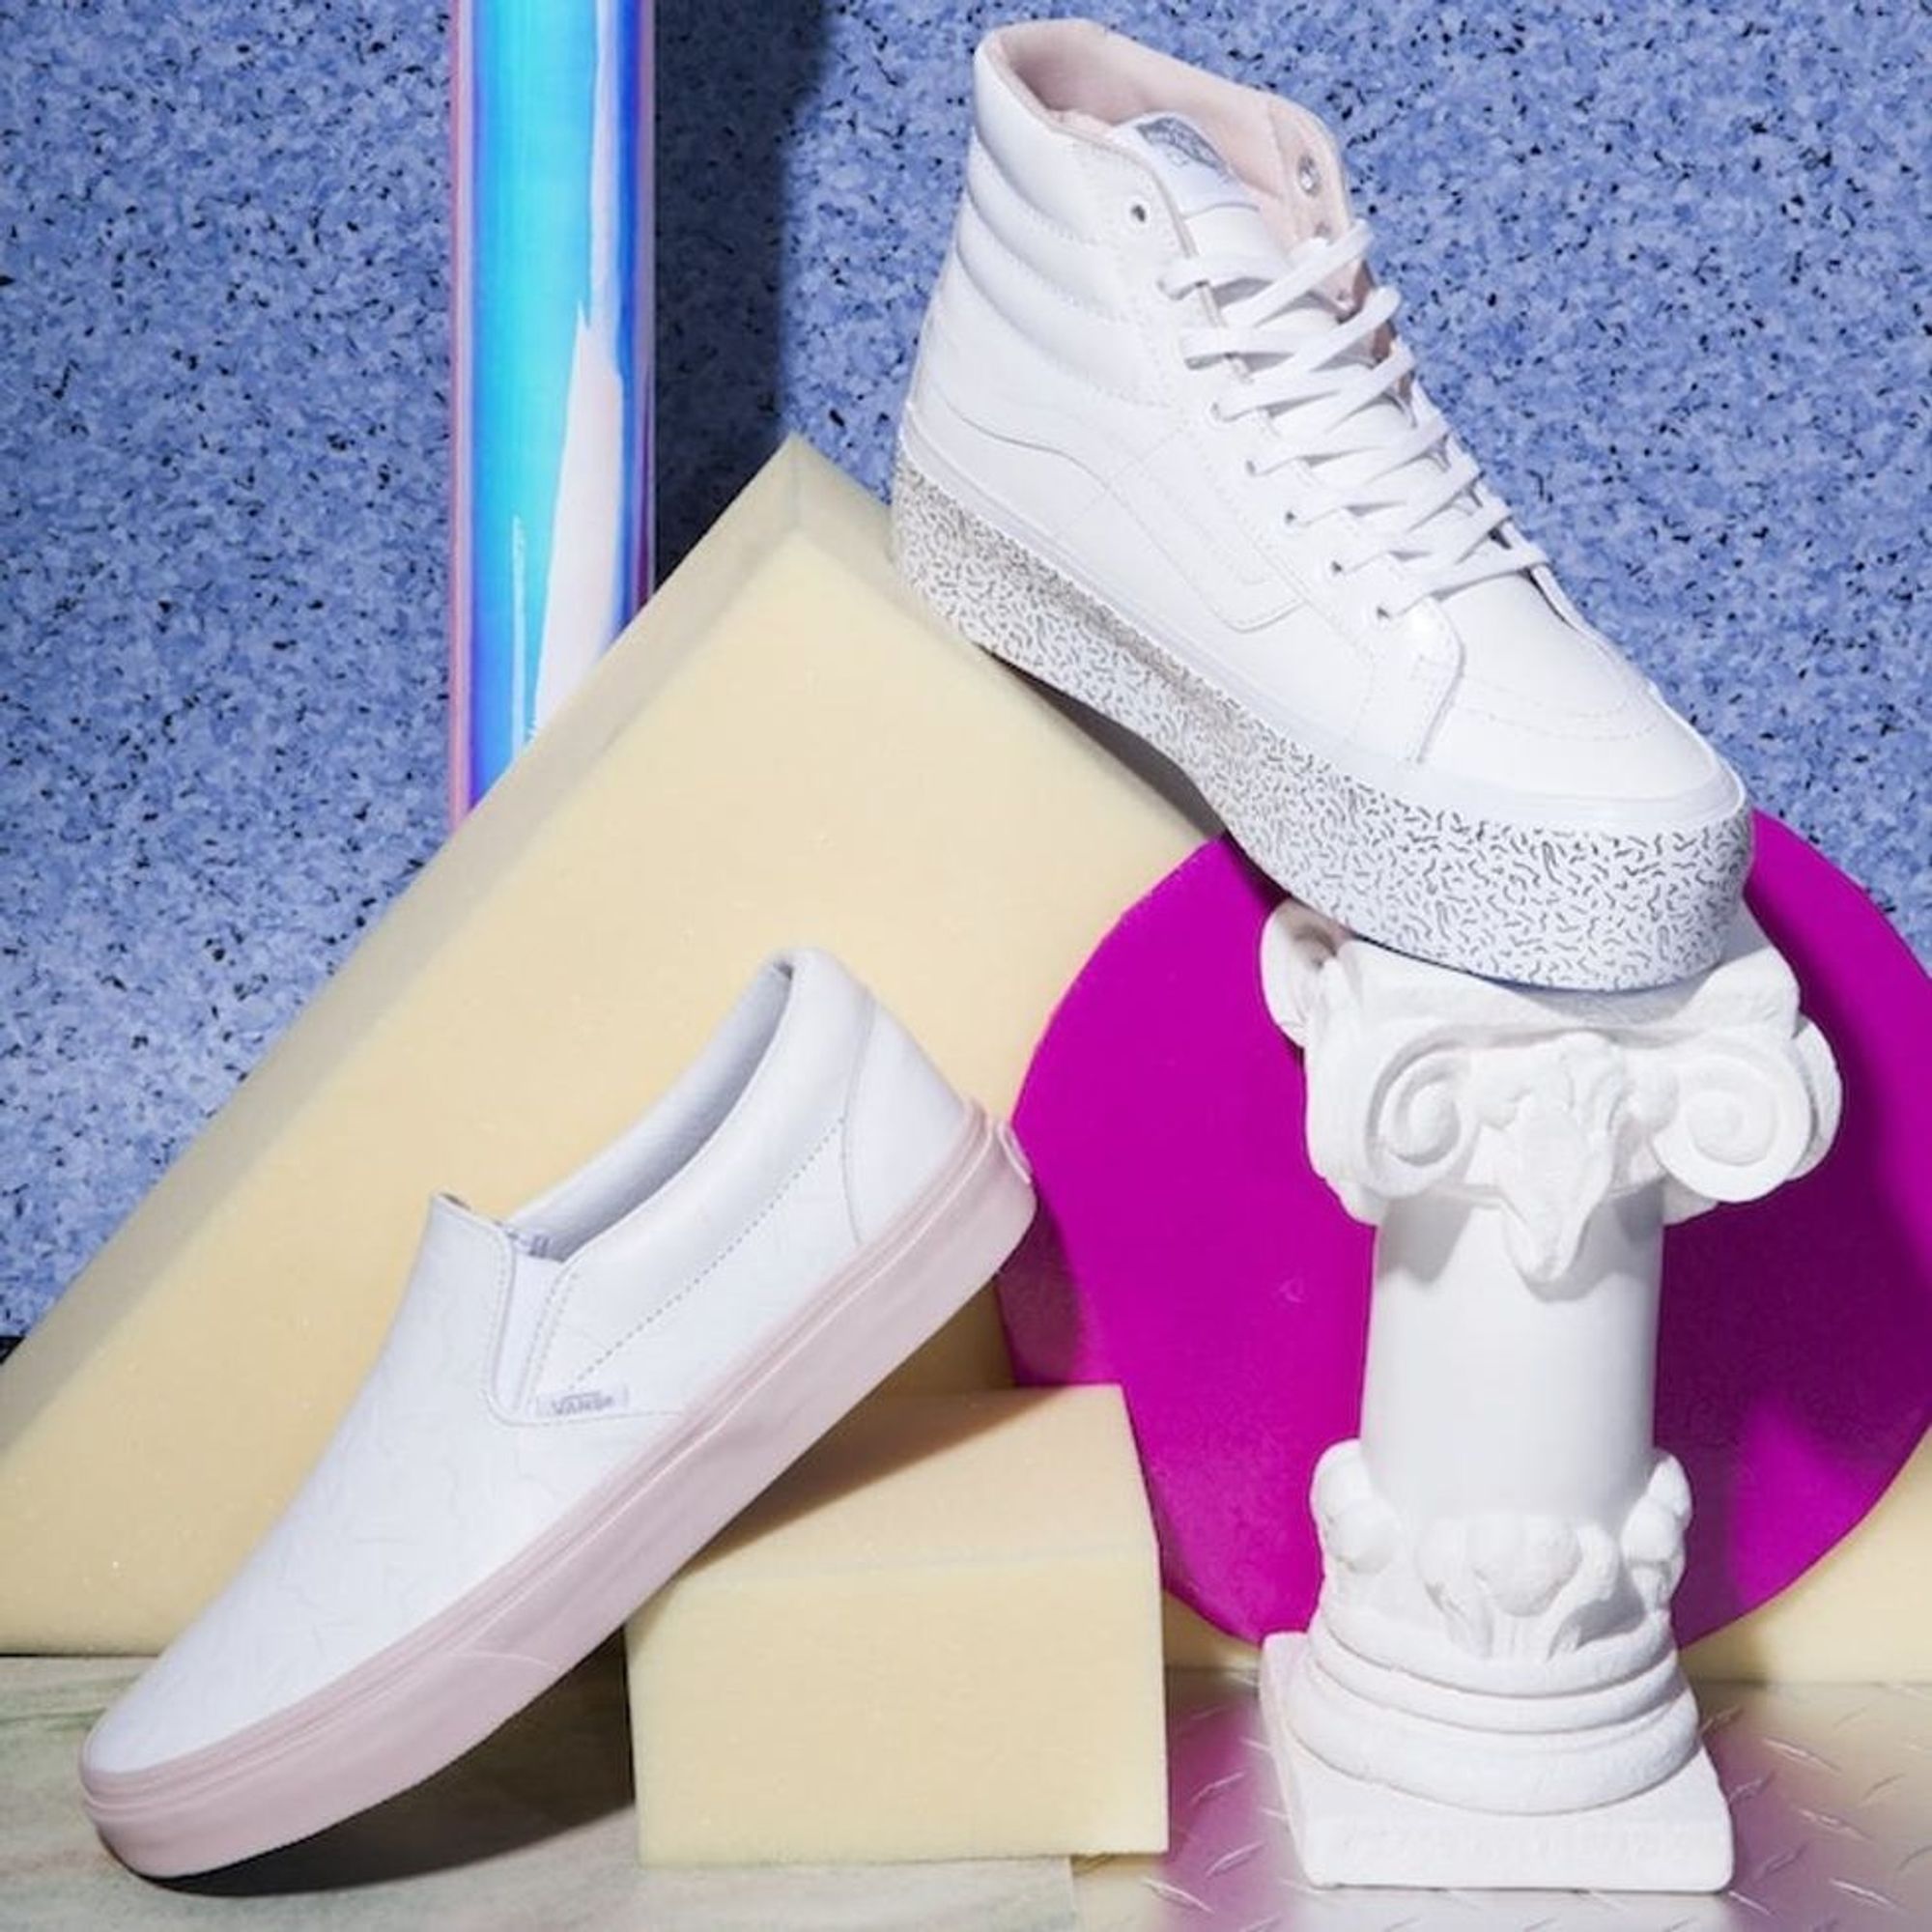 Nasty Gal + Vans = The Summer Shoe Collab All Cool Girls Need - Brit + Co